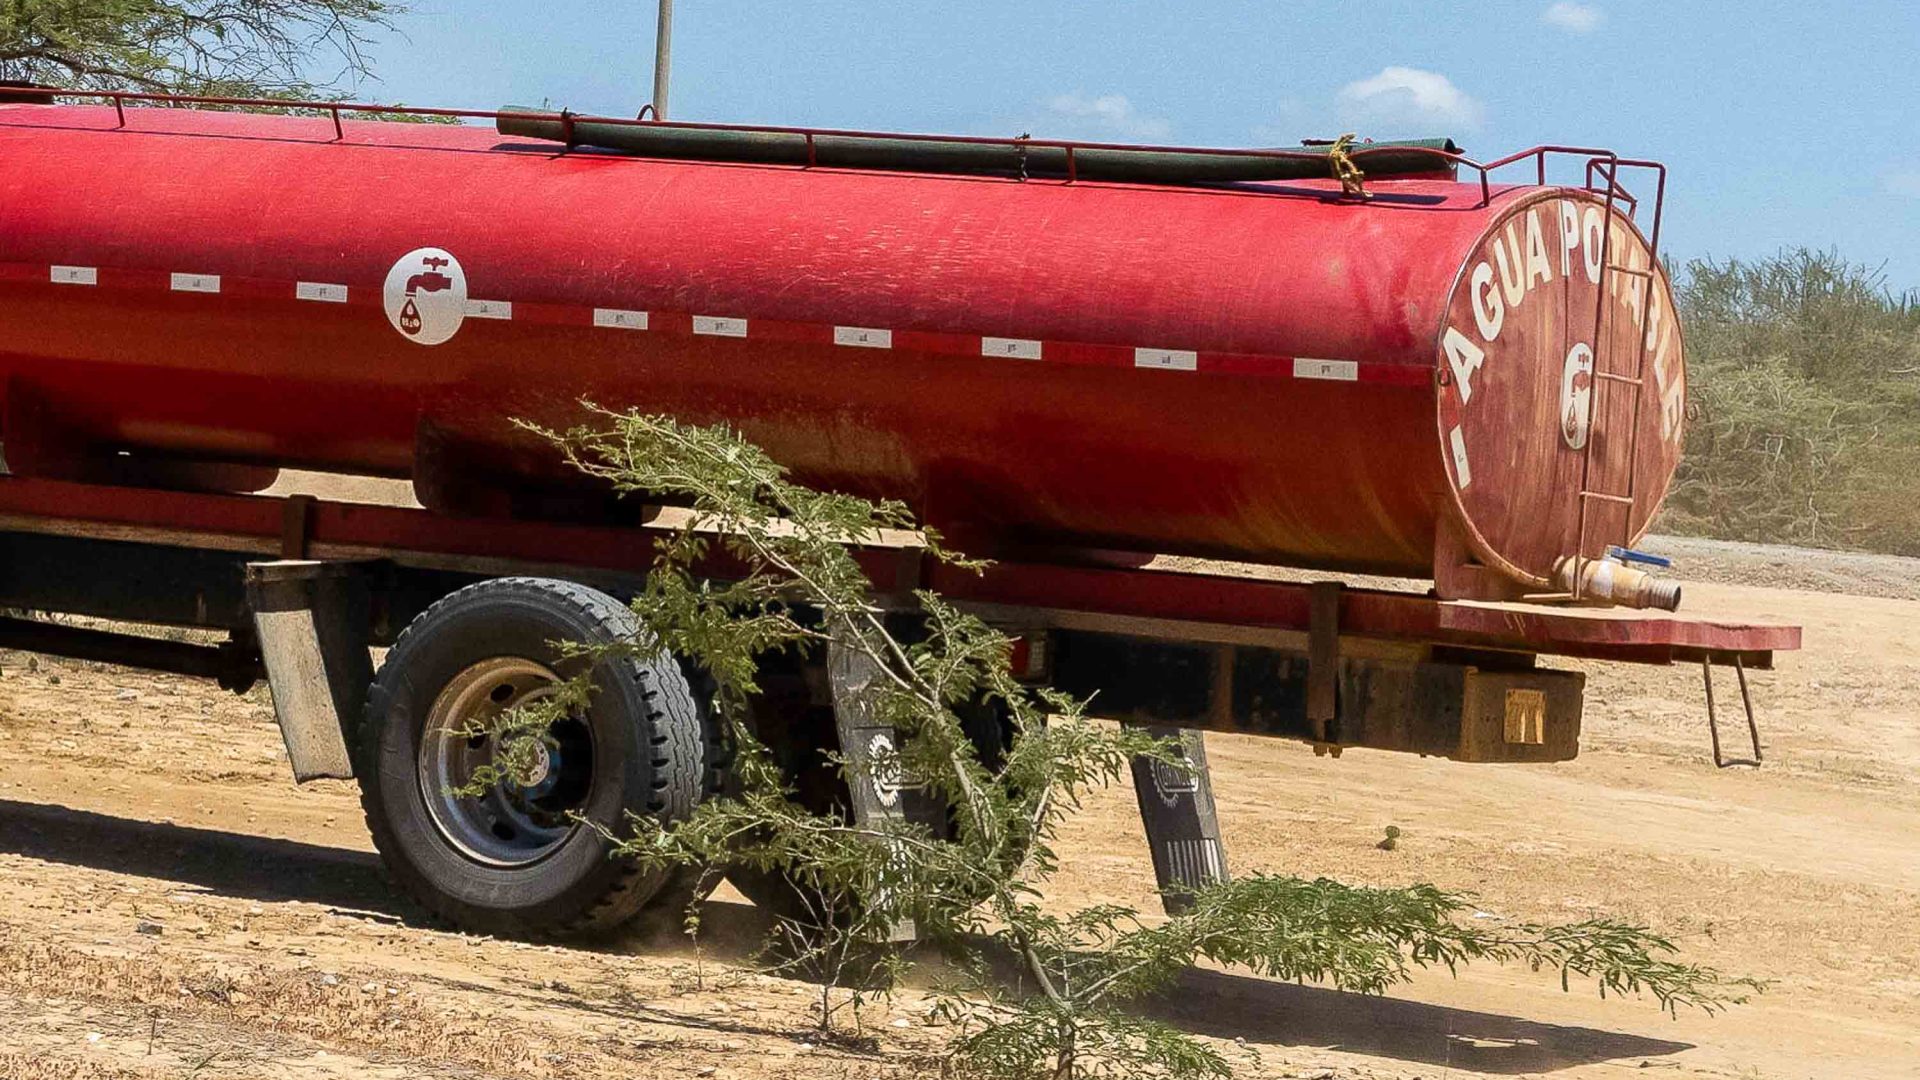 A red water tanker used to deliver potable water.